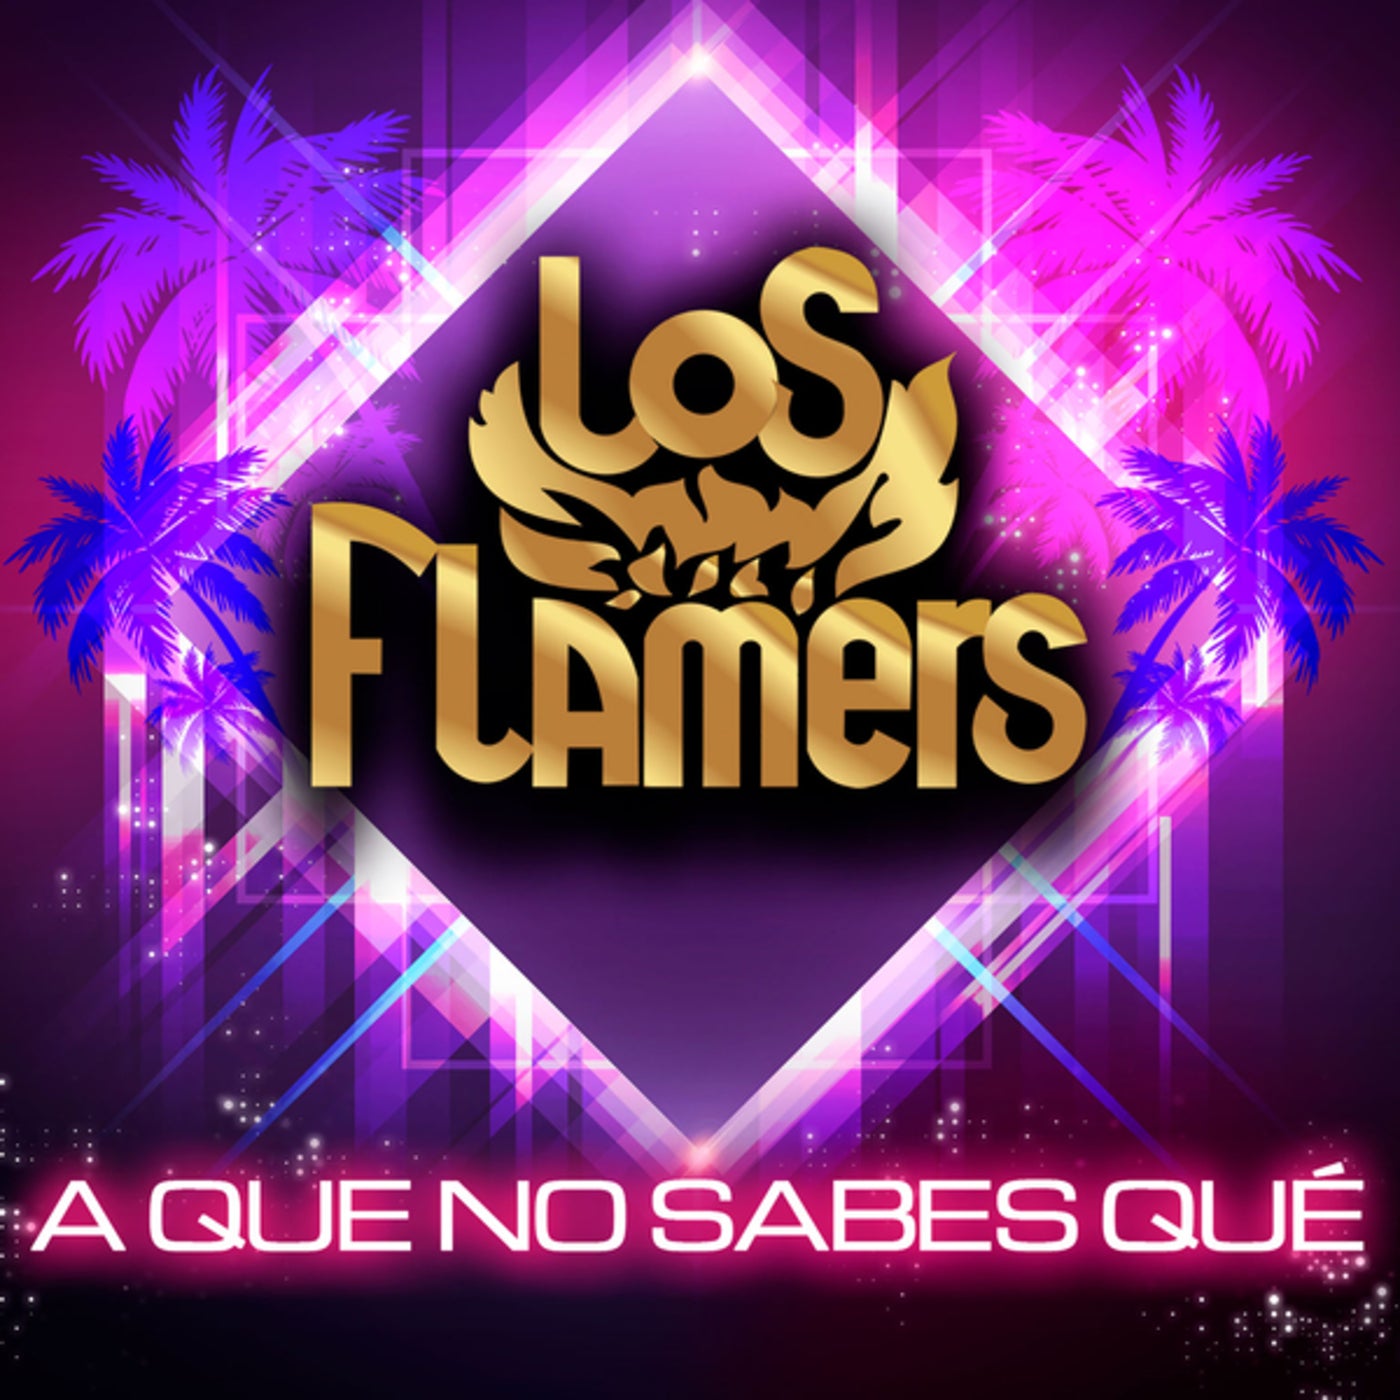 Atol De Elote by Los Flamers on Beatsource